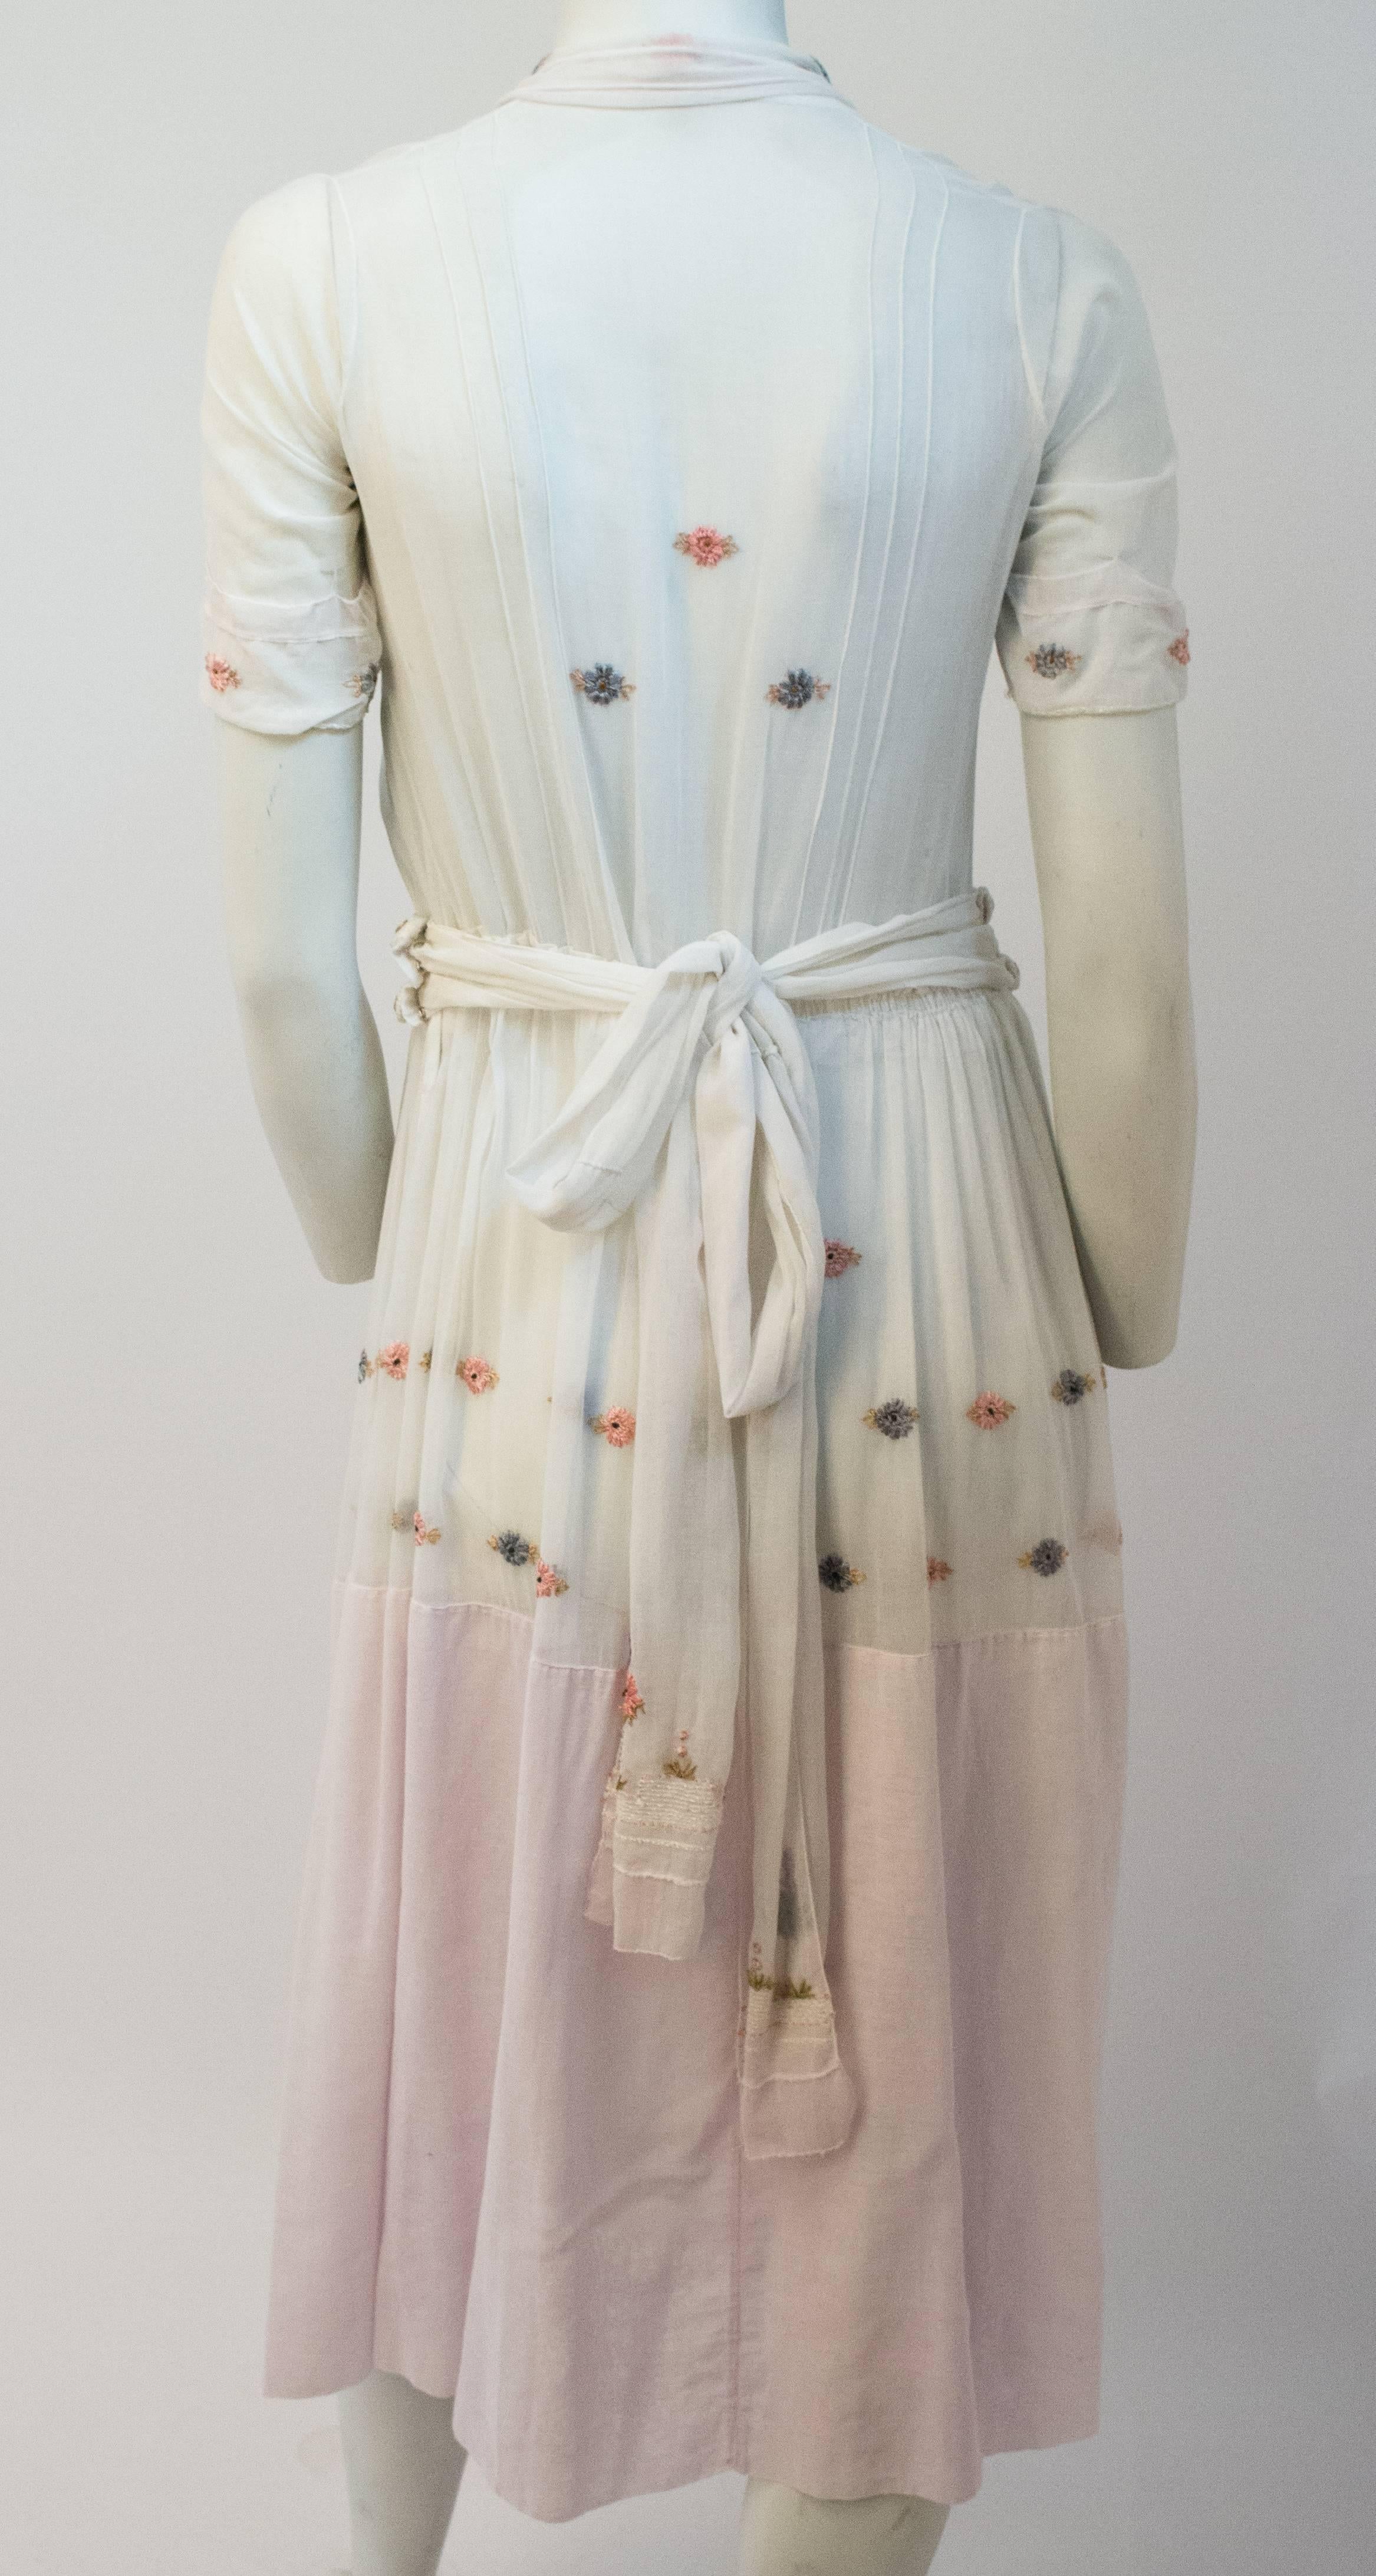 20s White Cotton Day Dress w/ Embroidered Flowers. Snap front closure. Detachable belt. 